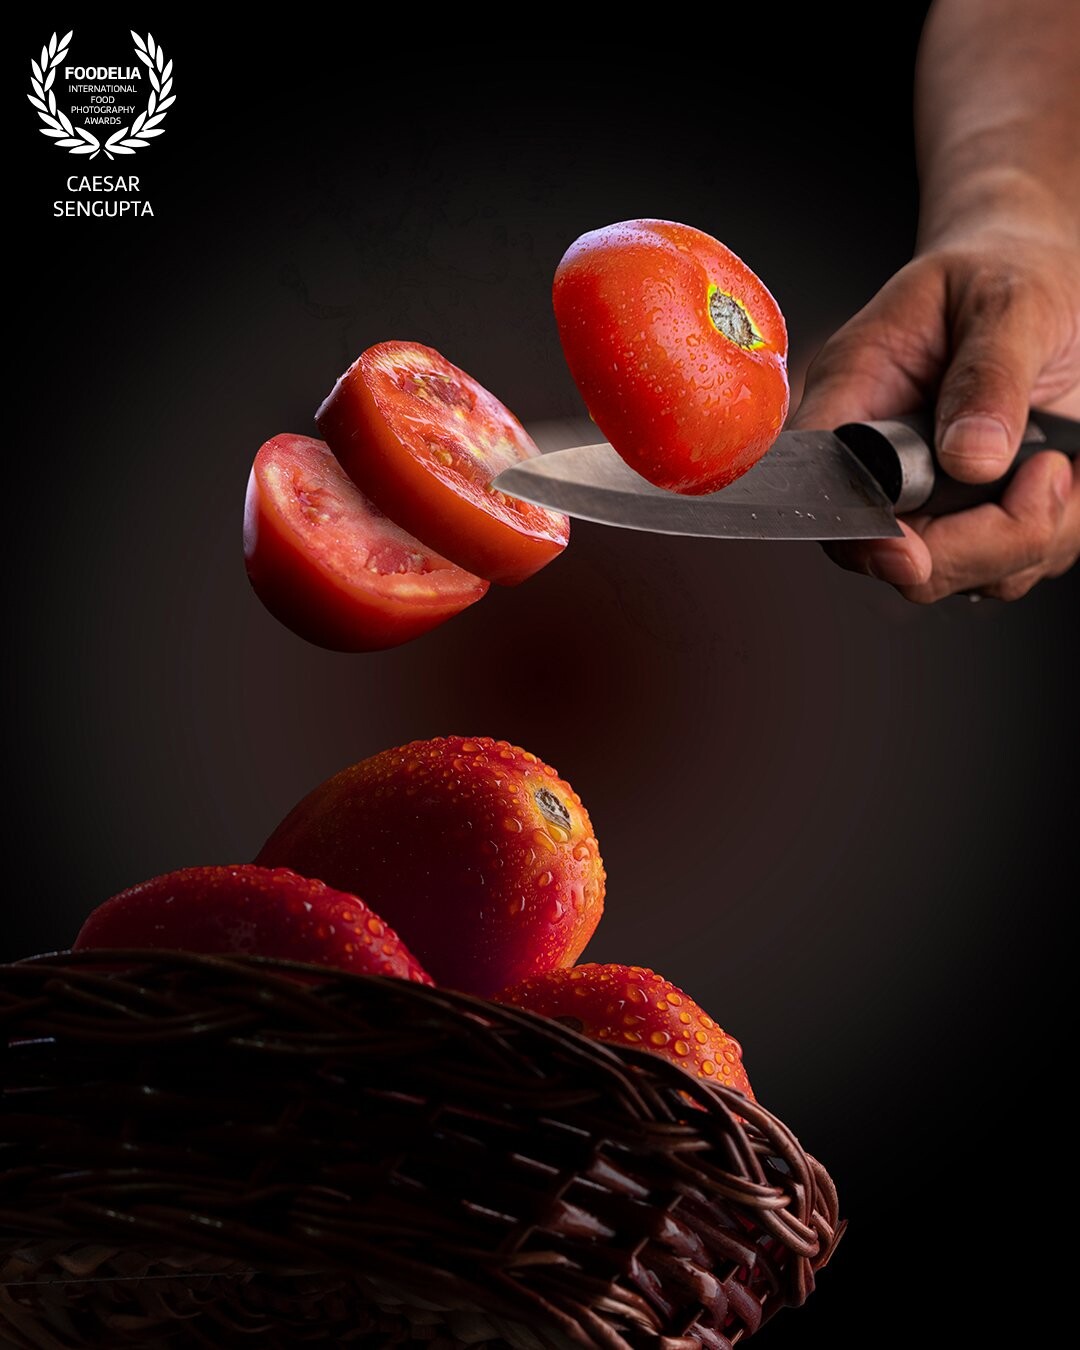 A dark and moody levitation image with predominance of red as the strongest colour. The perspective is from below to add a dramatic effect. The cut tomatoes are shot separately. The water droplets add freshness to the vegetables. A slight motion blur applied to the knife bringing in a sense of motion.